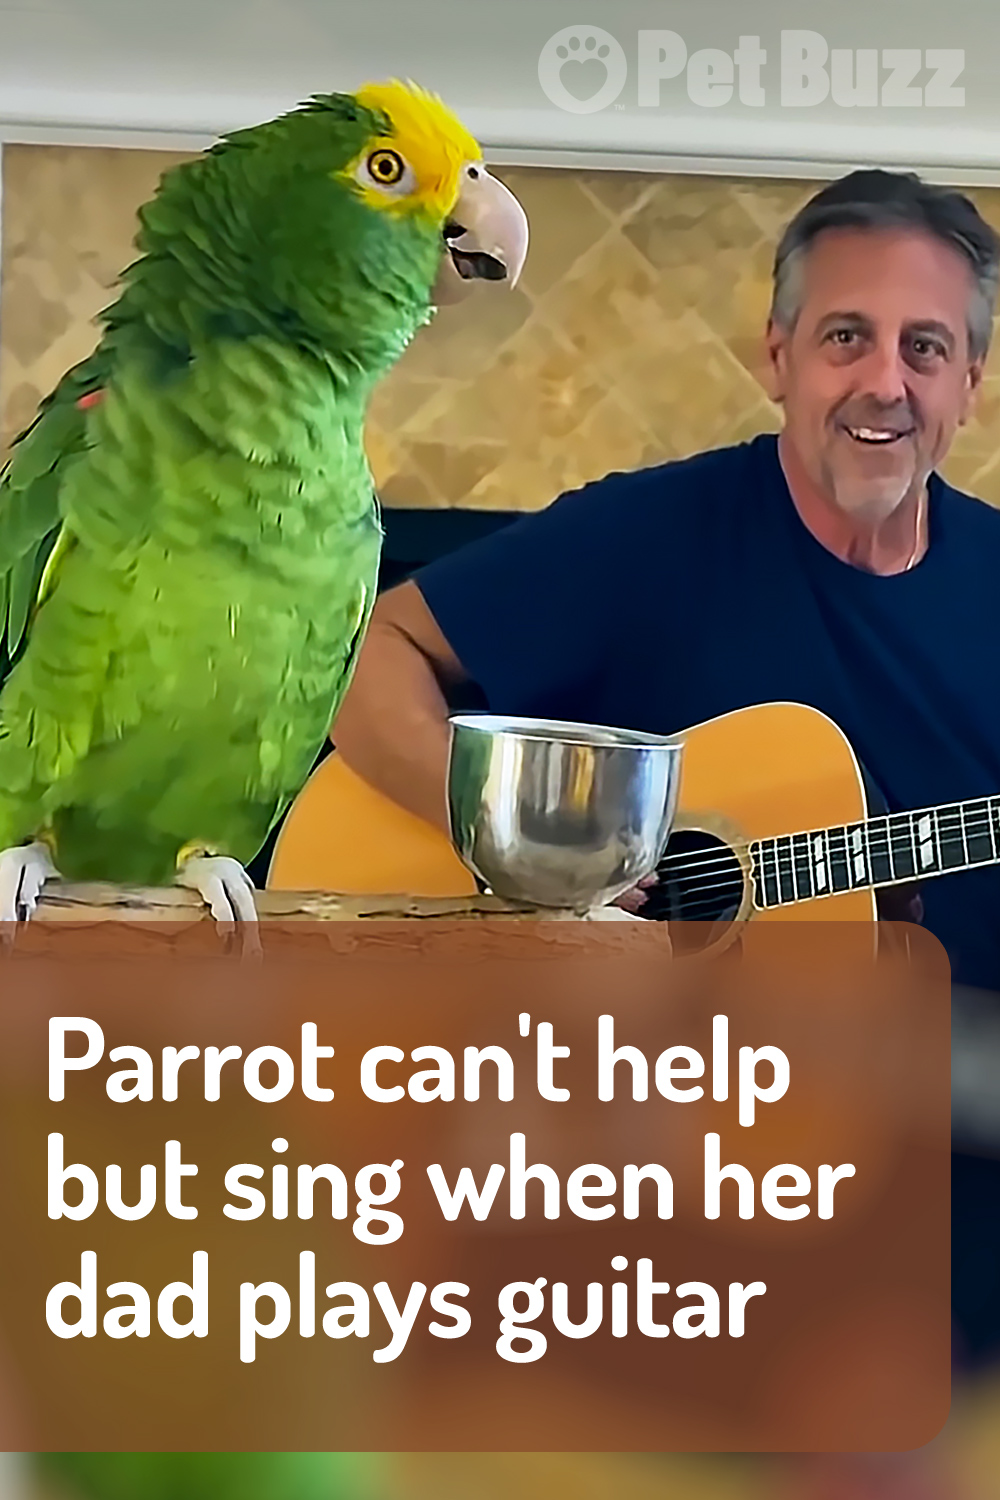 Parrot can’t help but sing when her dad plays guitar